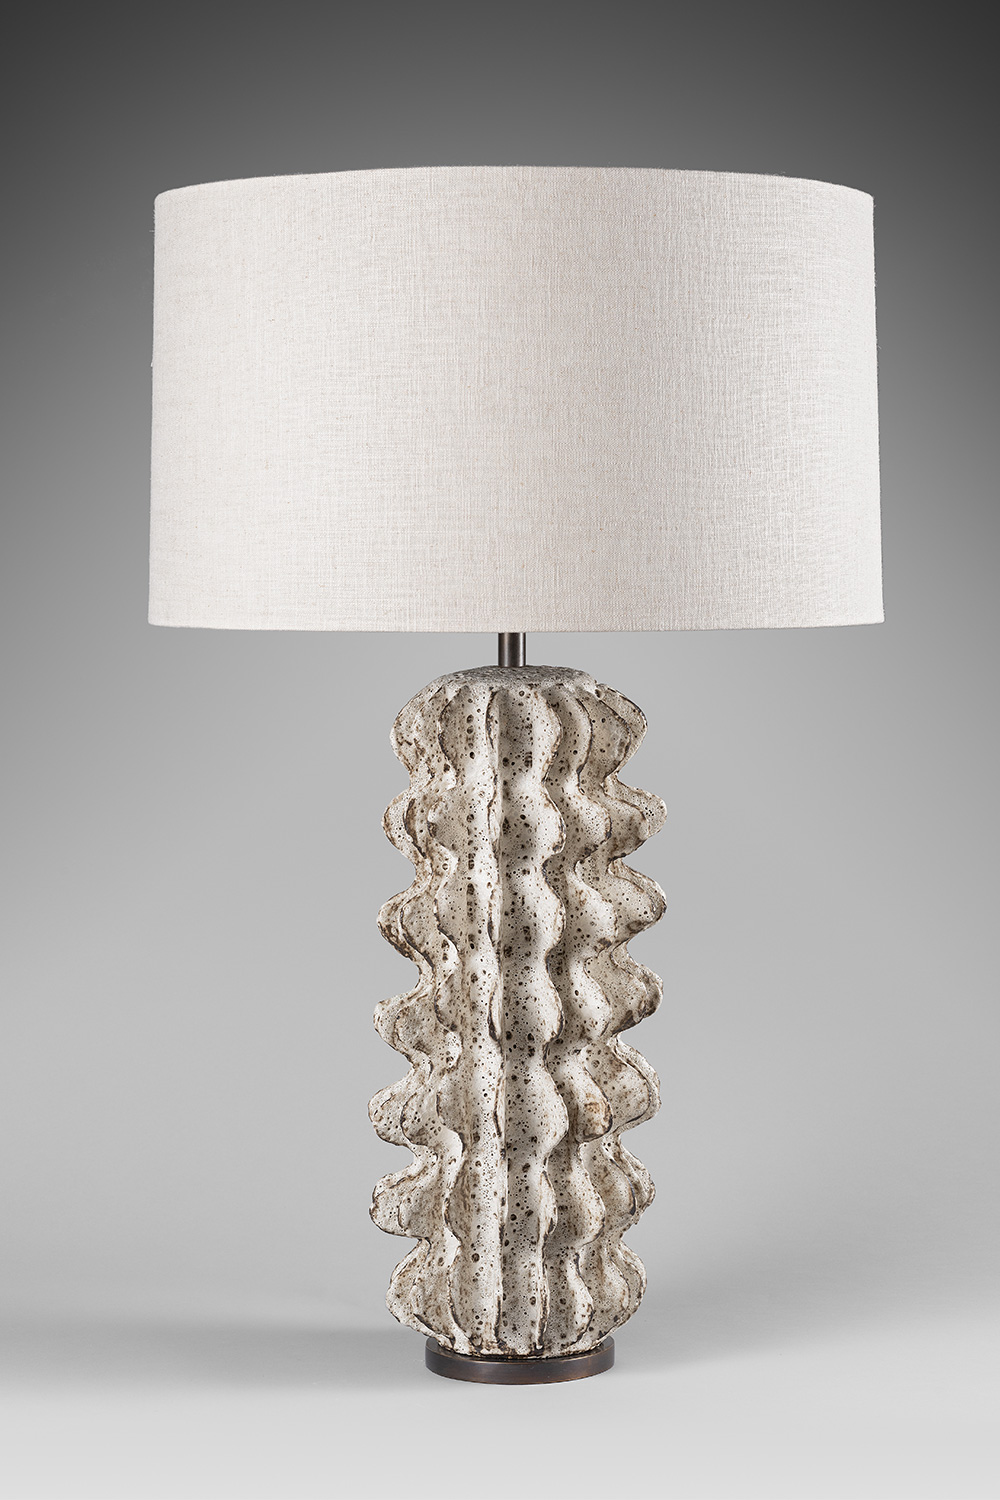 Clatter table lamp